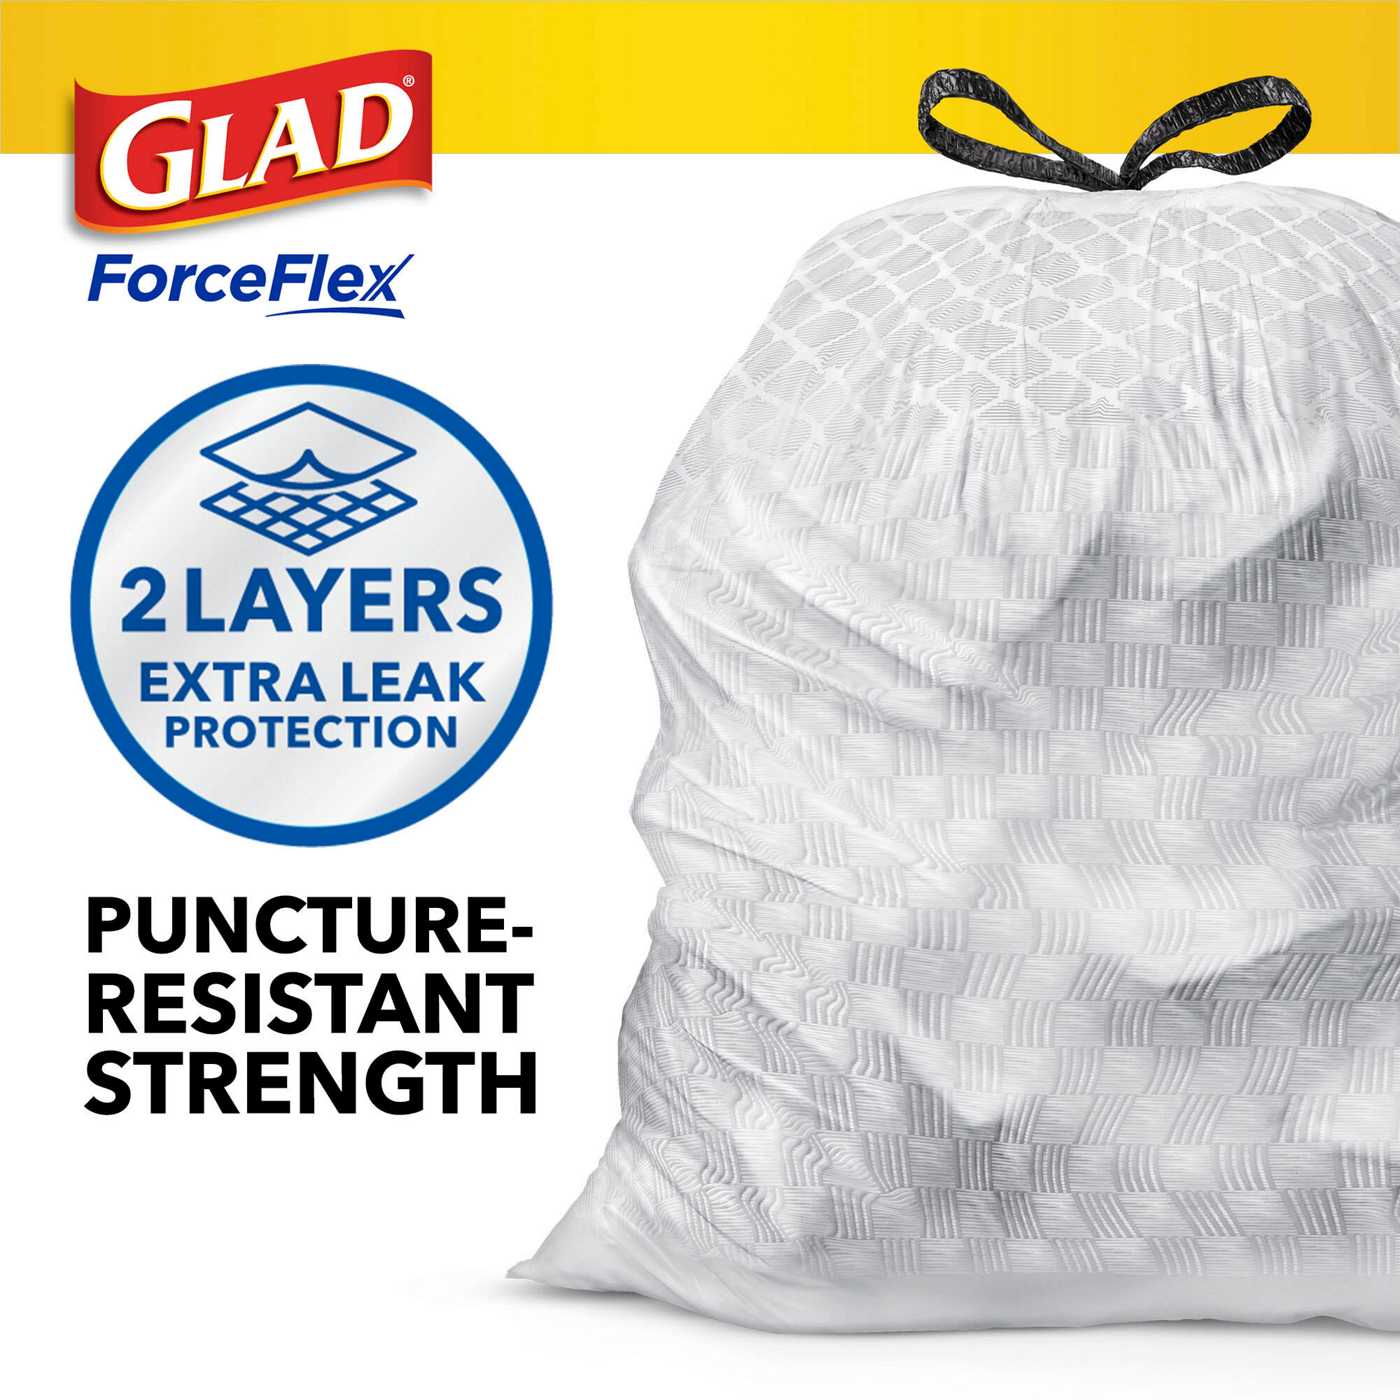 Glad ForceFlex Tall Kitchen Drawstring Trash Bags, 13 Gallon - Gain Lavender Scent with Febreeze Freshness; image 5 of 9